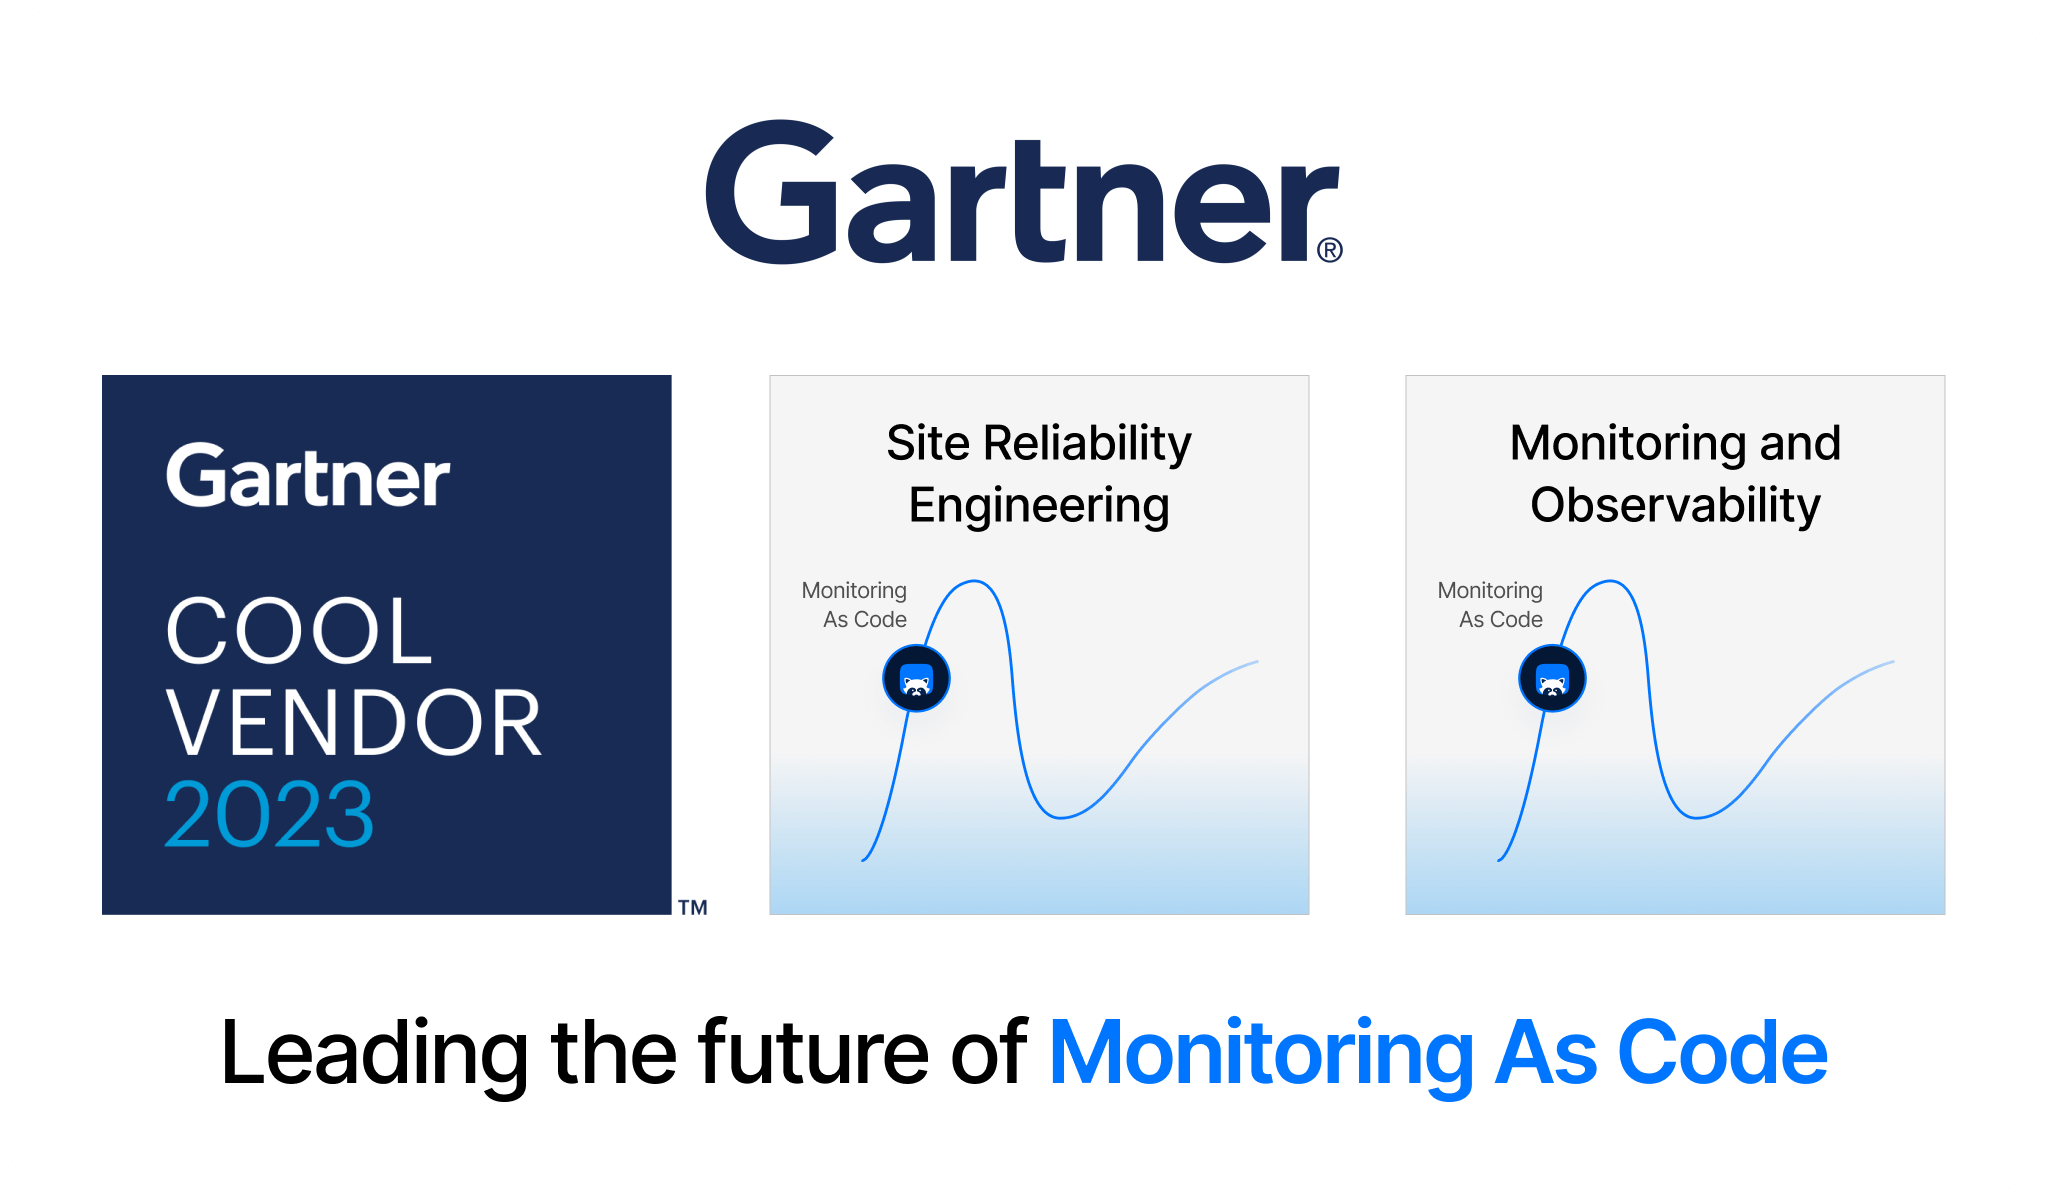 Gartner badges: Cool Vendor 2023, Site Reliability Engineering, Monitoring and Observability